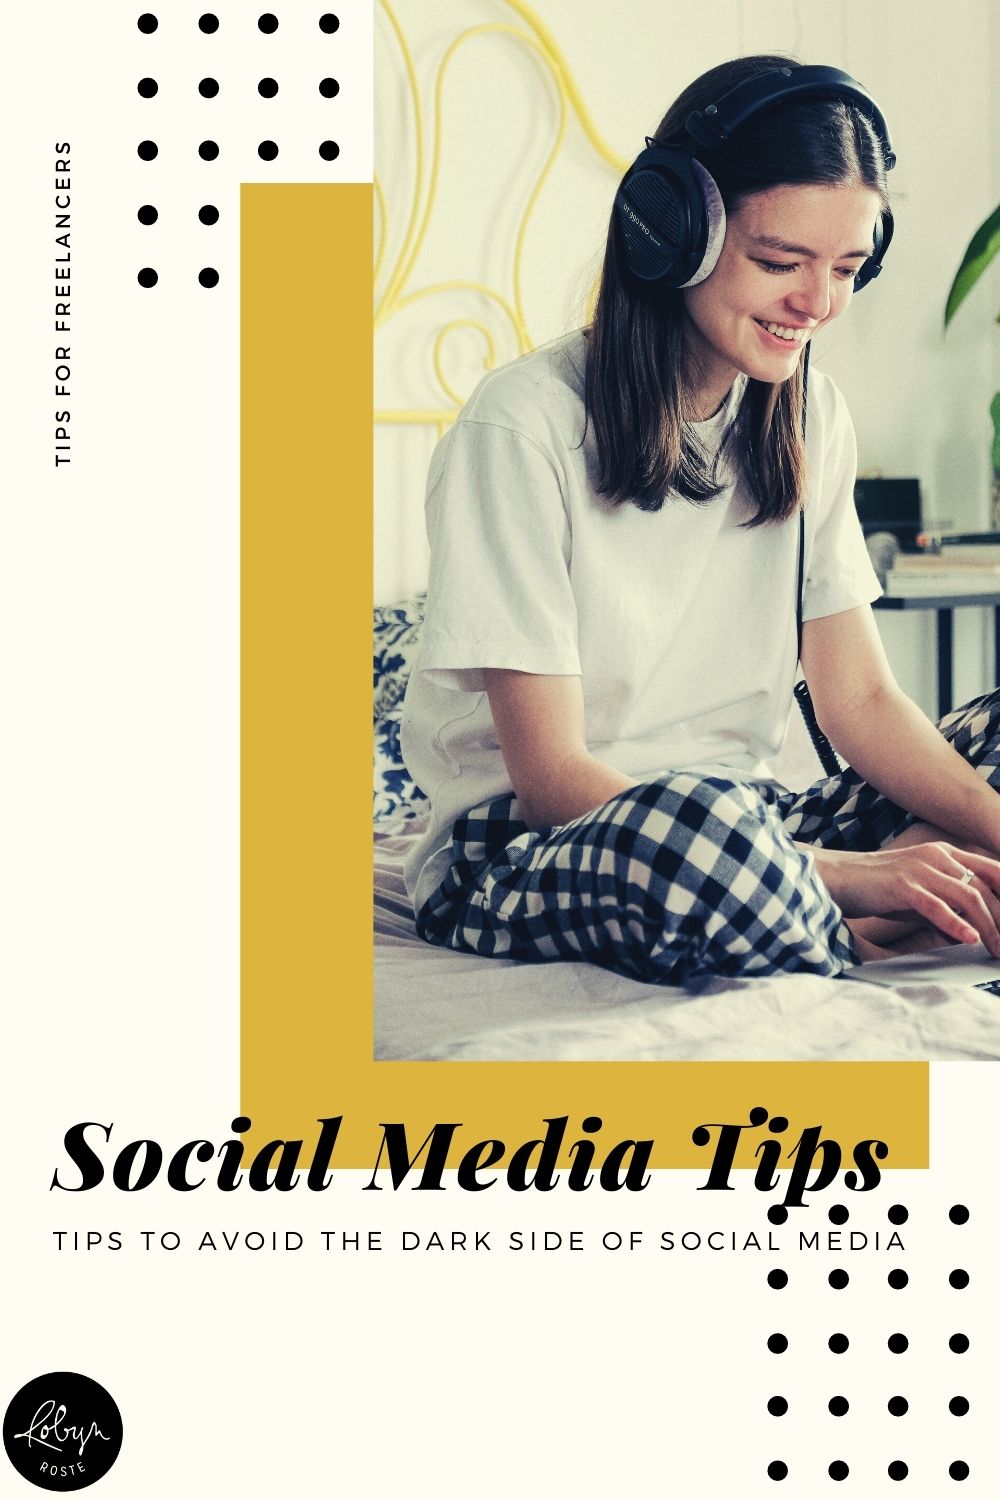 I spend a lot of time talking about why freelancers should be social online but there are a few social media dangers we need to pay attention to. As literary citizens, it's important we don't get swept up in the drama of the moment when we're engaging online. Here are a few quick tips for avoiding the negative side of social media.